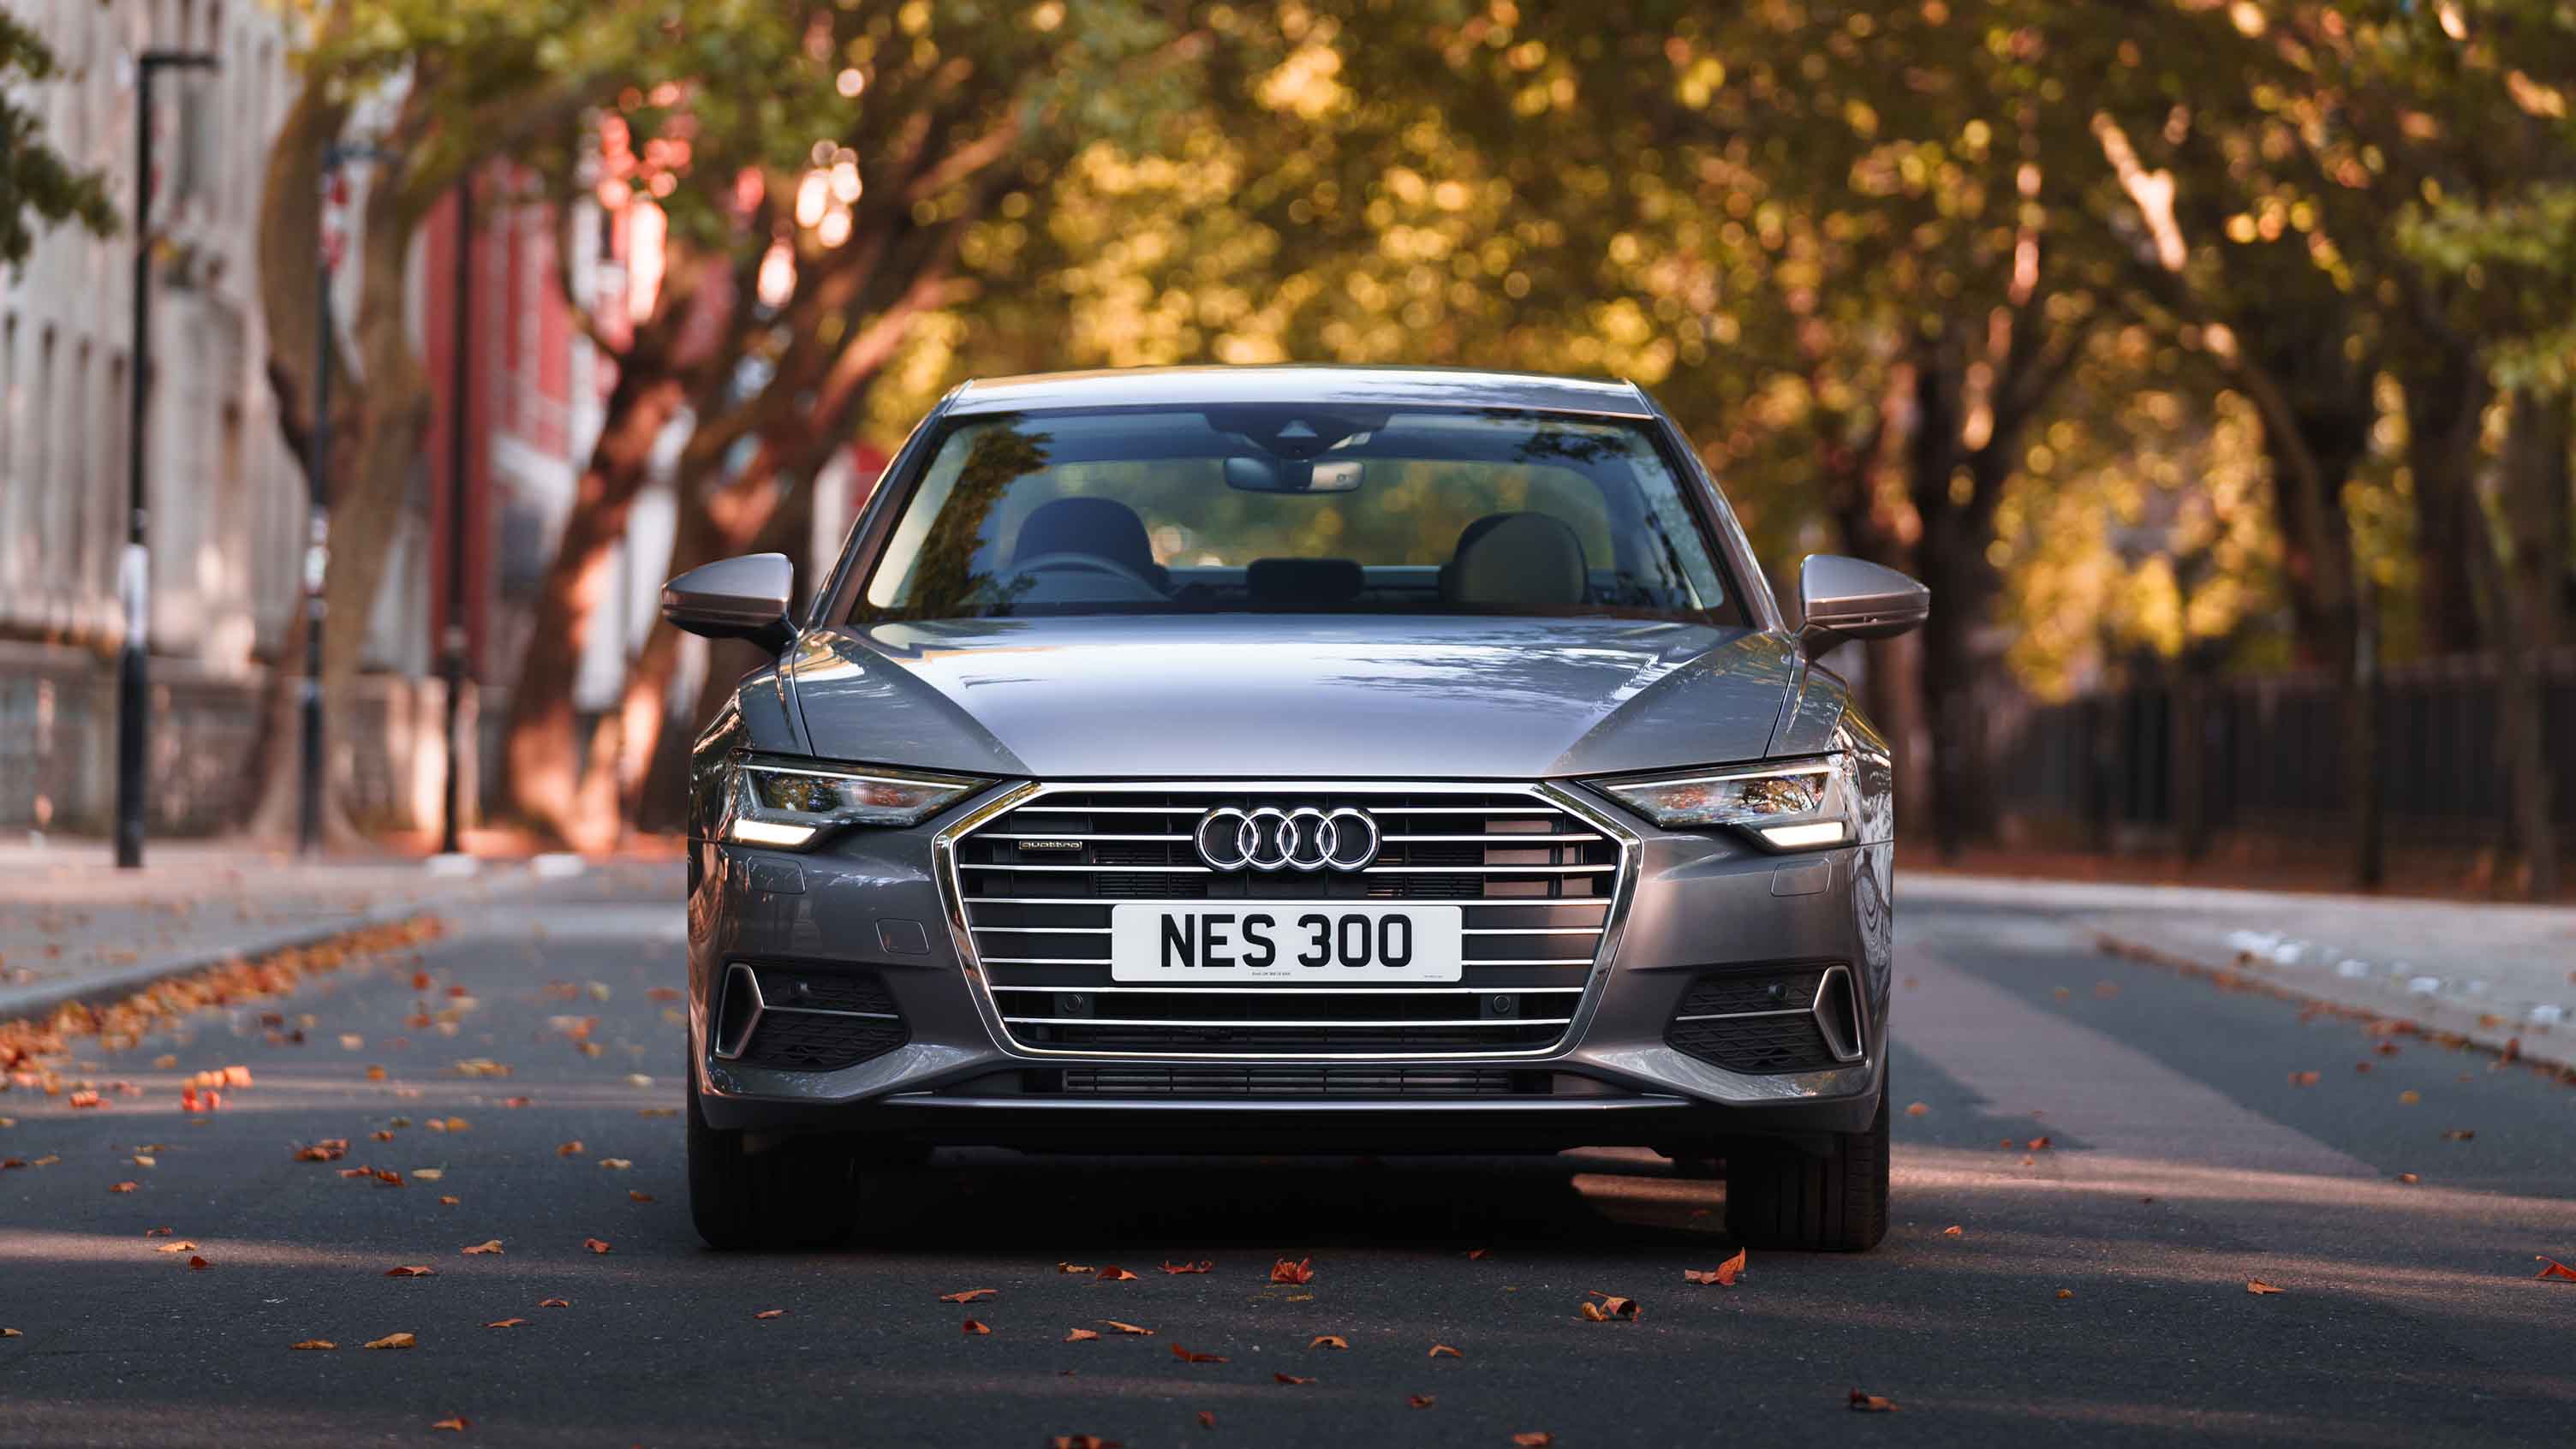 Audi A6 front view